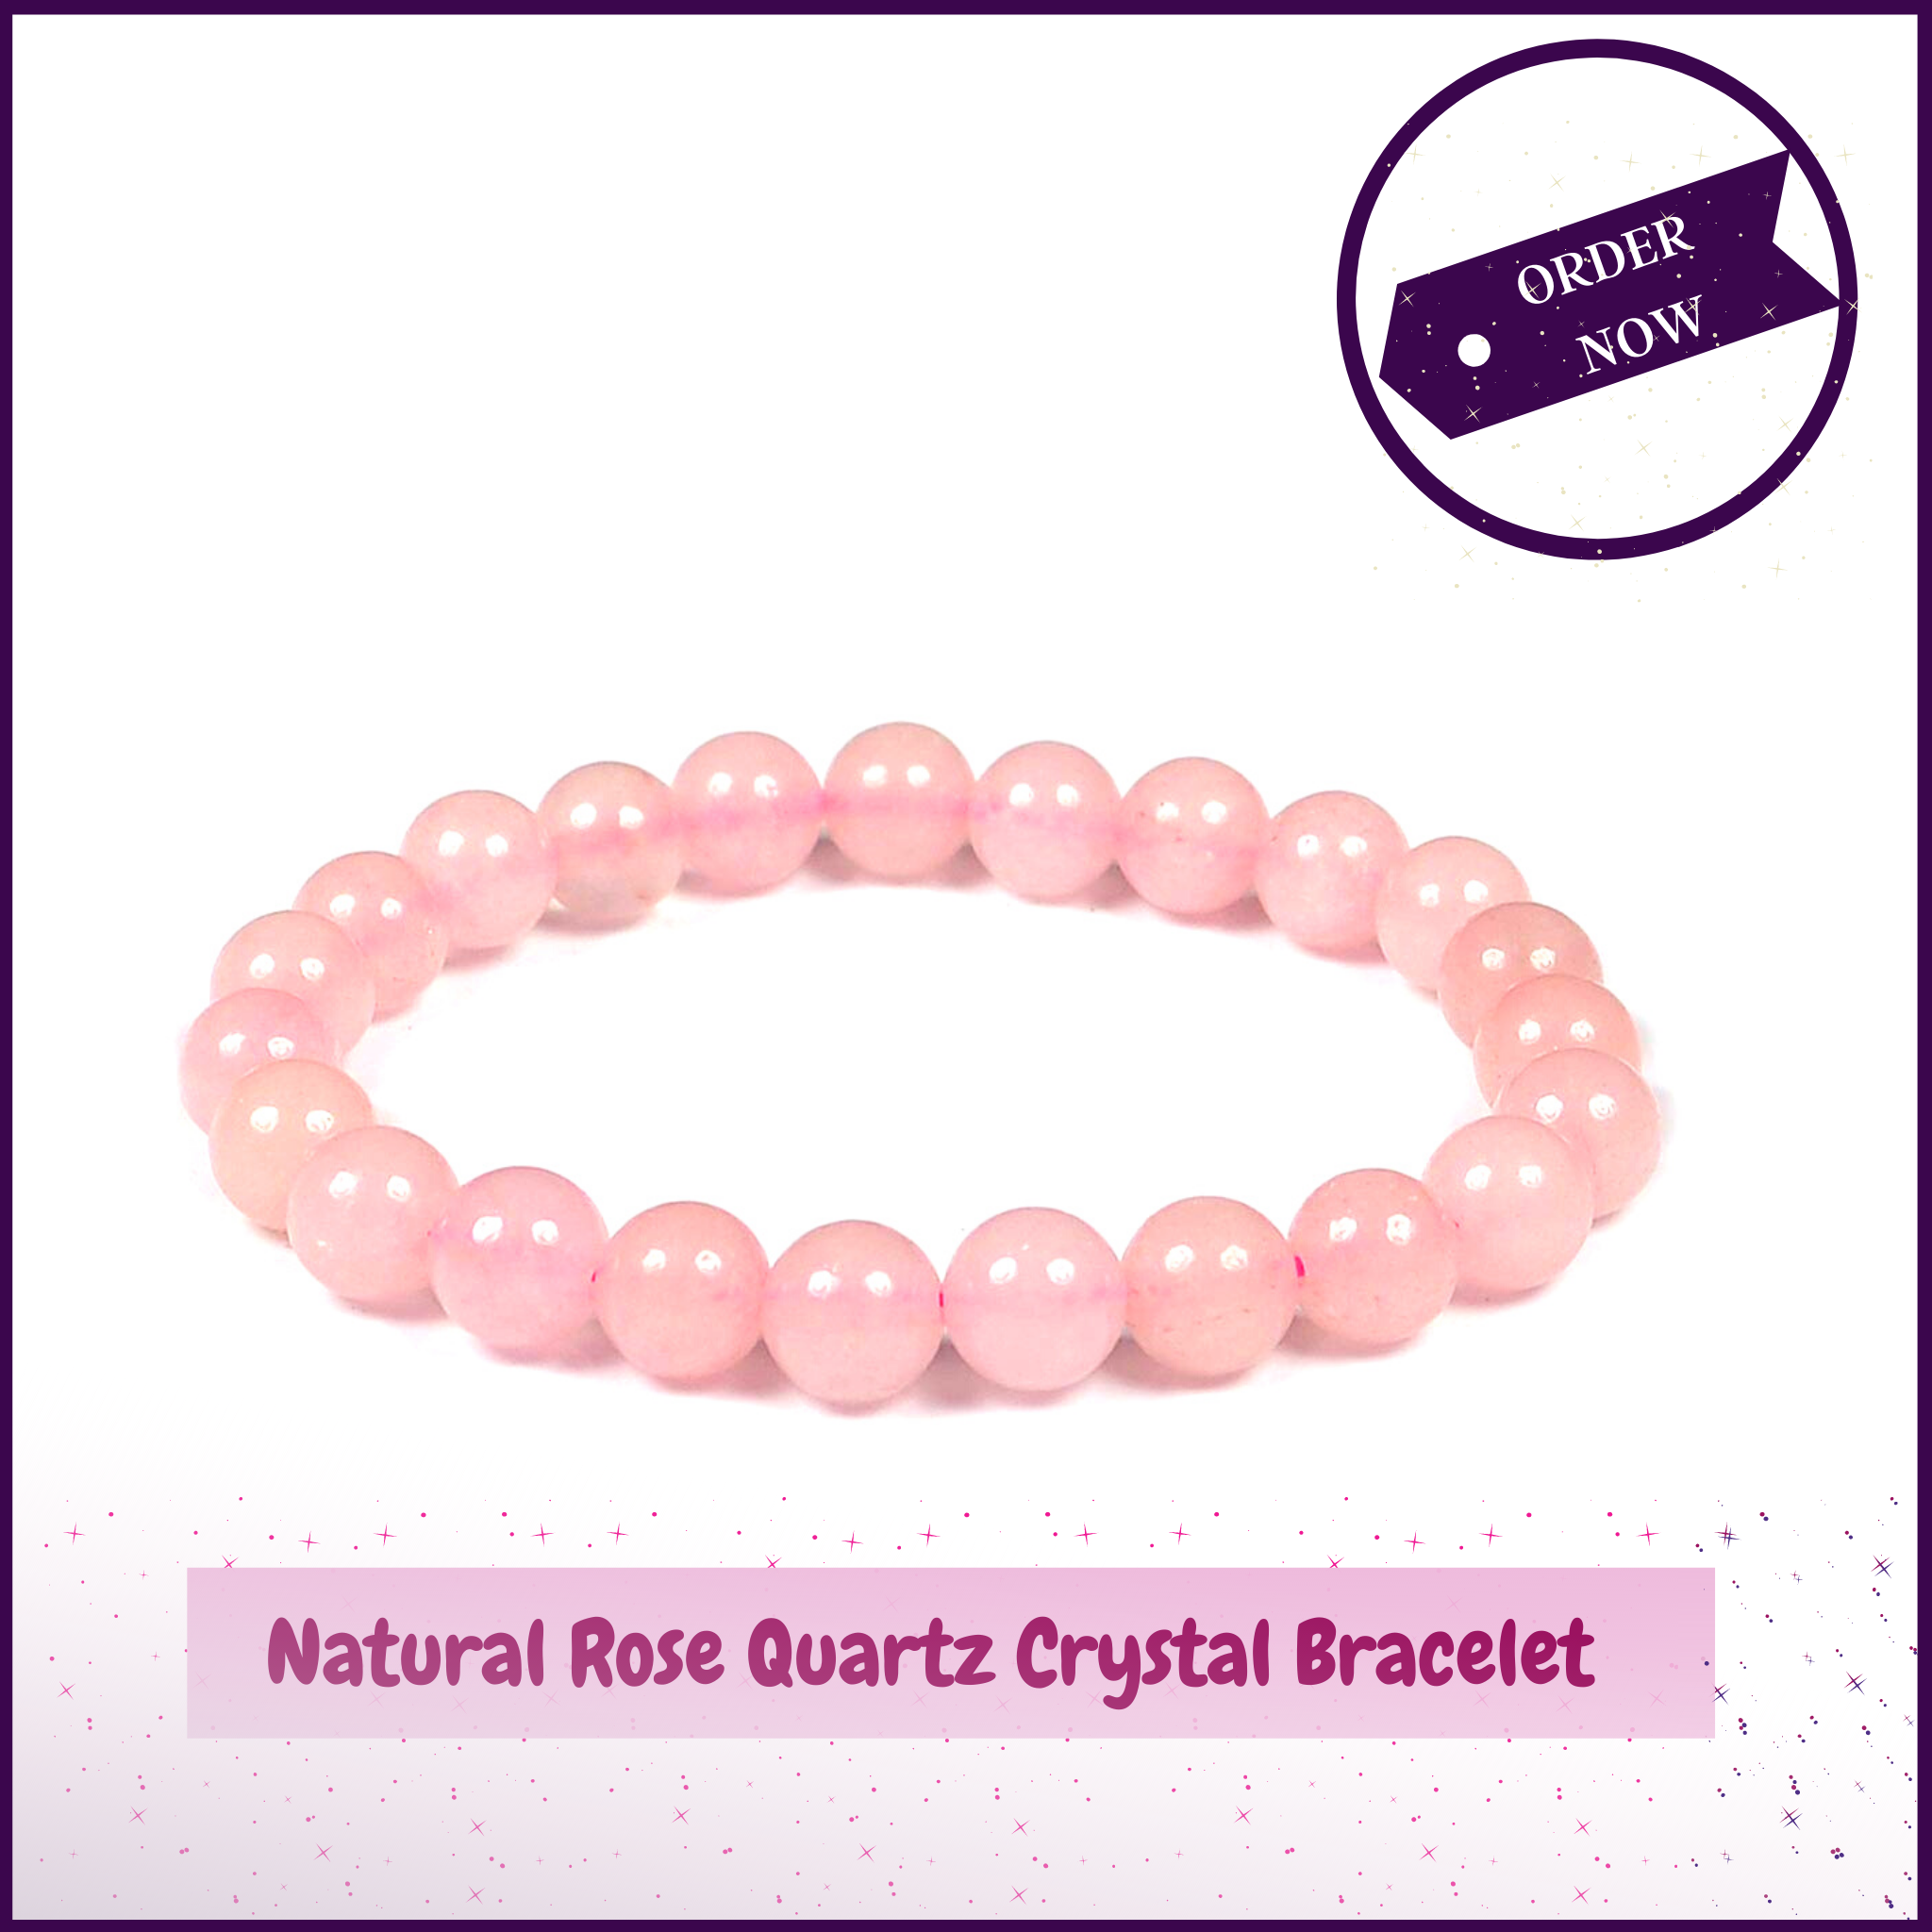 Rose Quartz Crystal Stone Bracelet to Attract Loving Energy To Relationships - 51pyramids